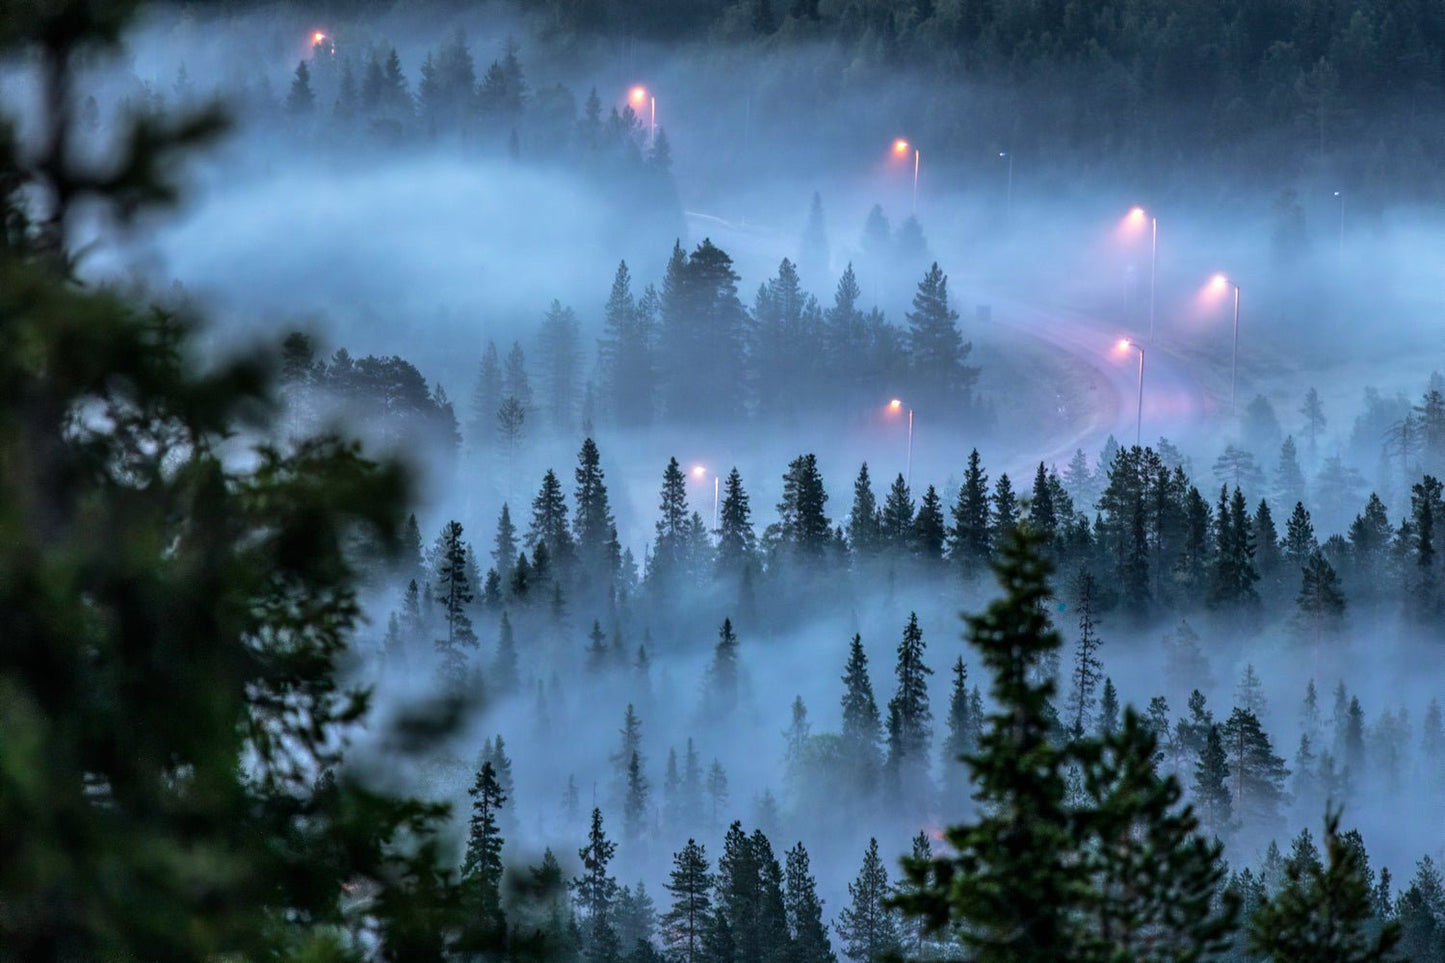 Aerial photo of fog-covered forest with winding road and streetlights, landscape fading in the mist.